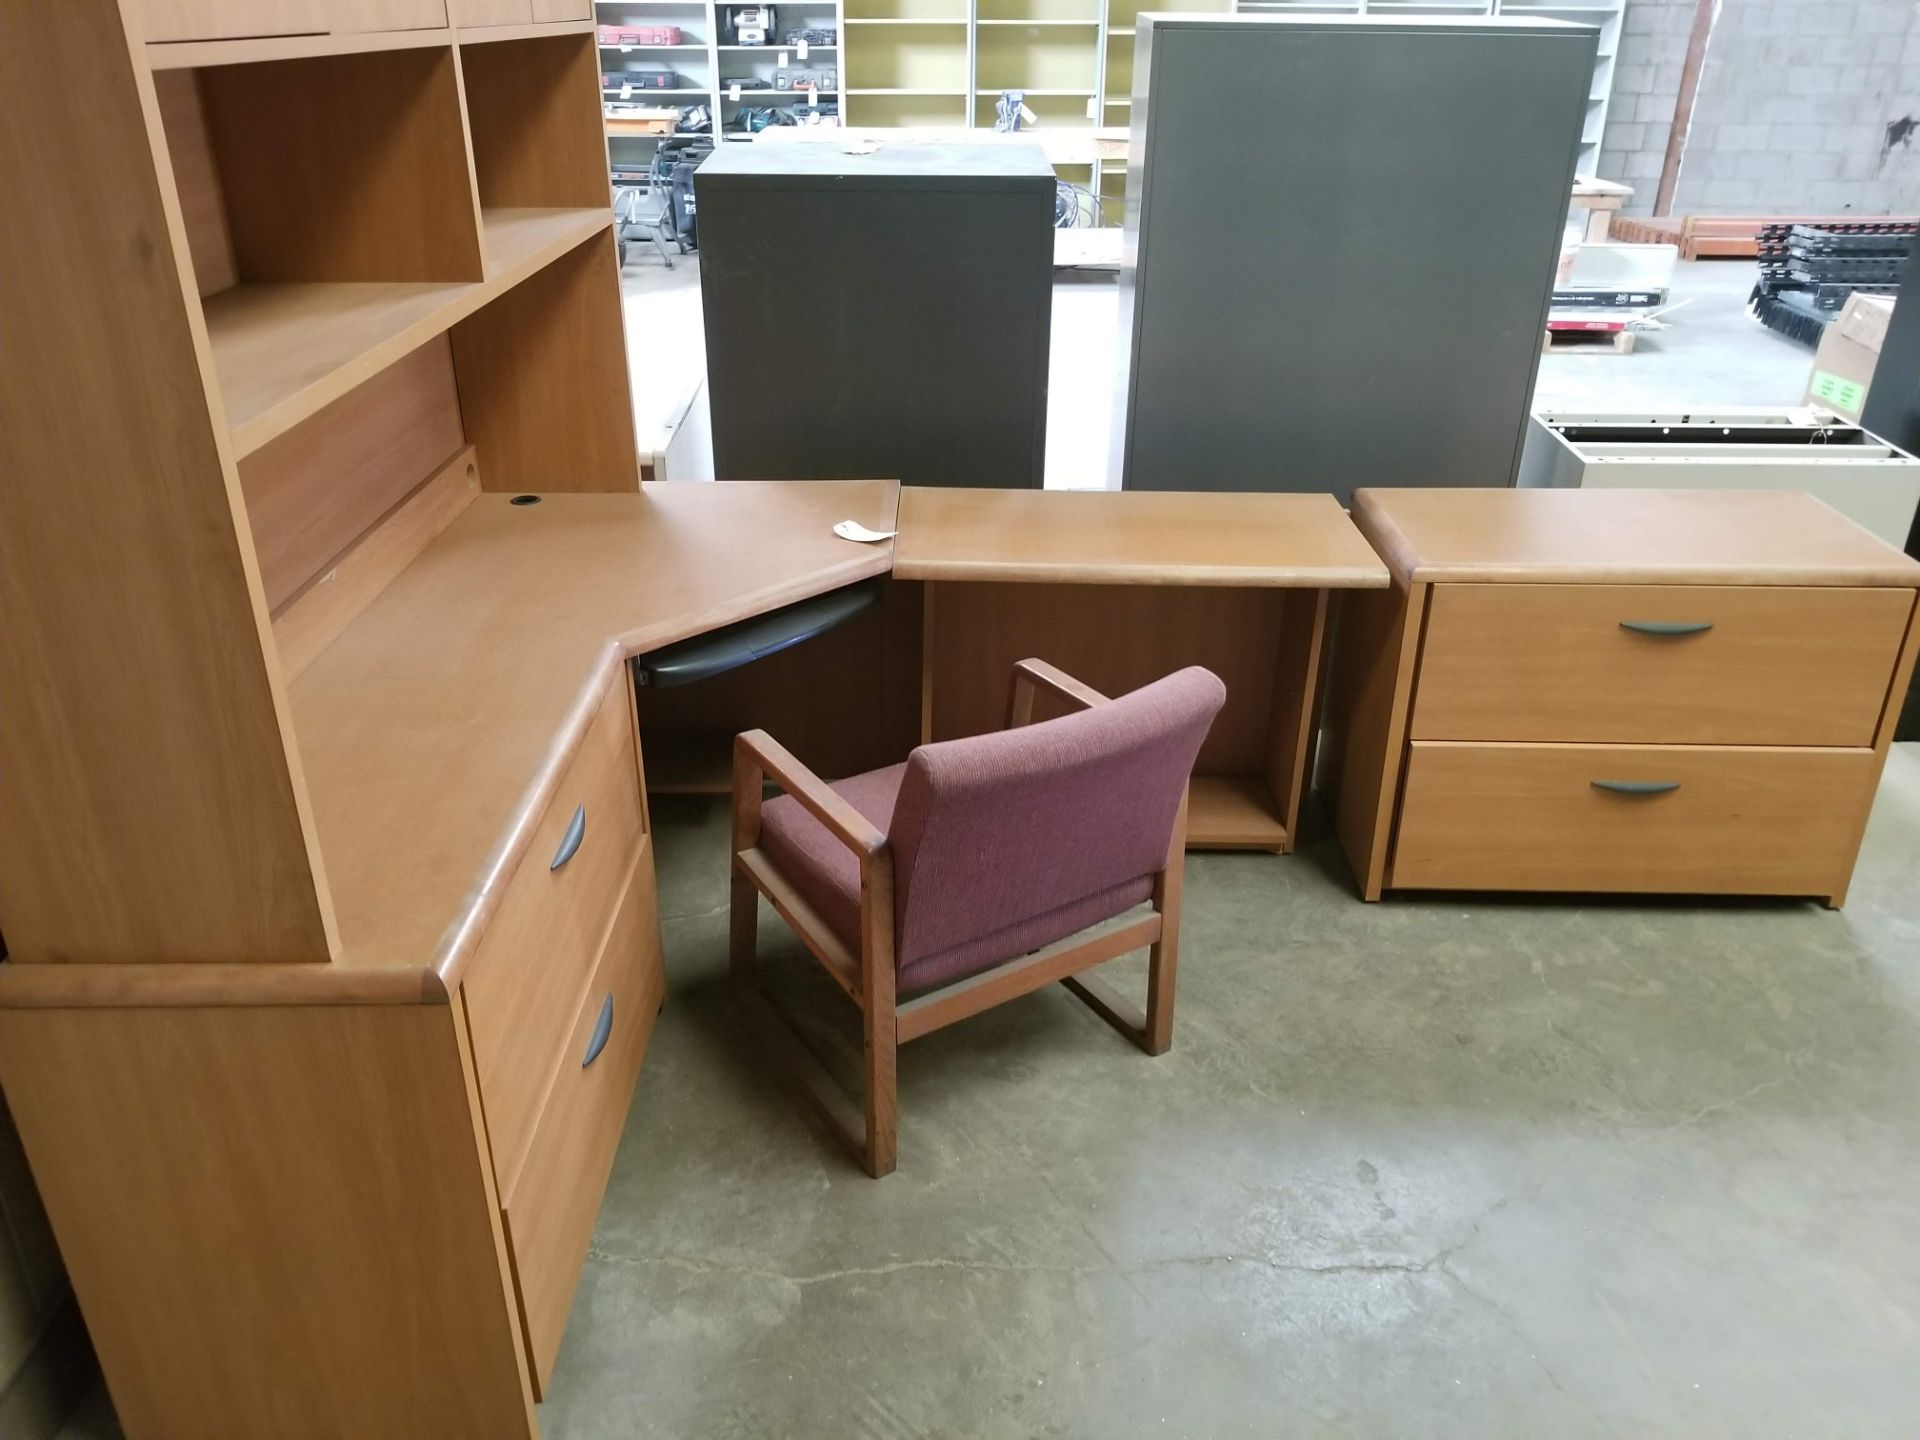 "L" Shaped Office Desk w/ Overhead Storage with Office Chair